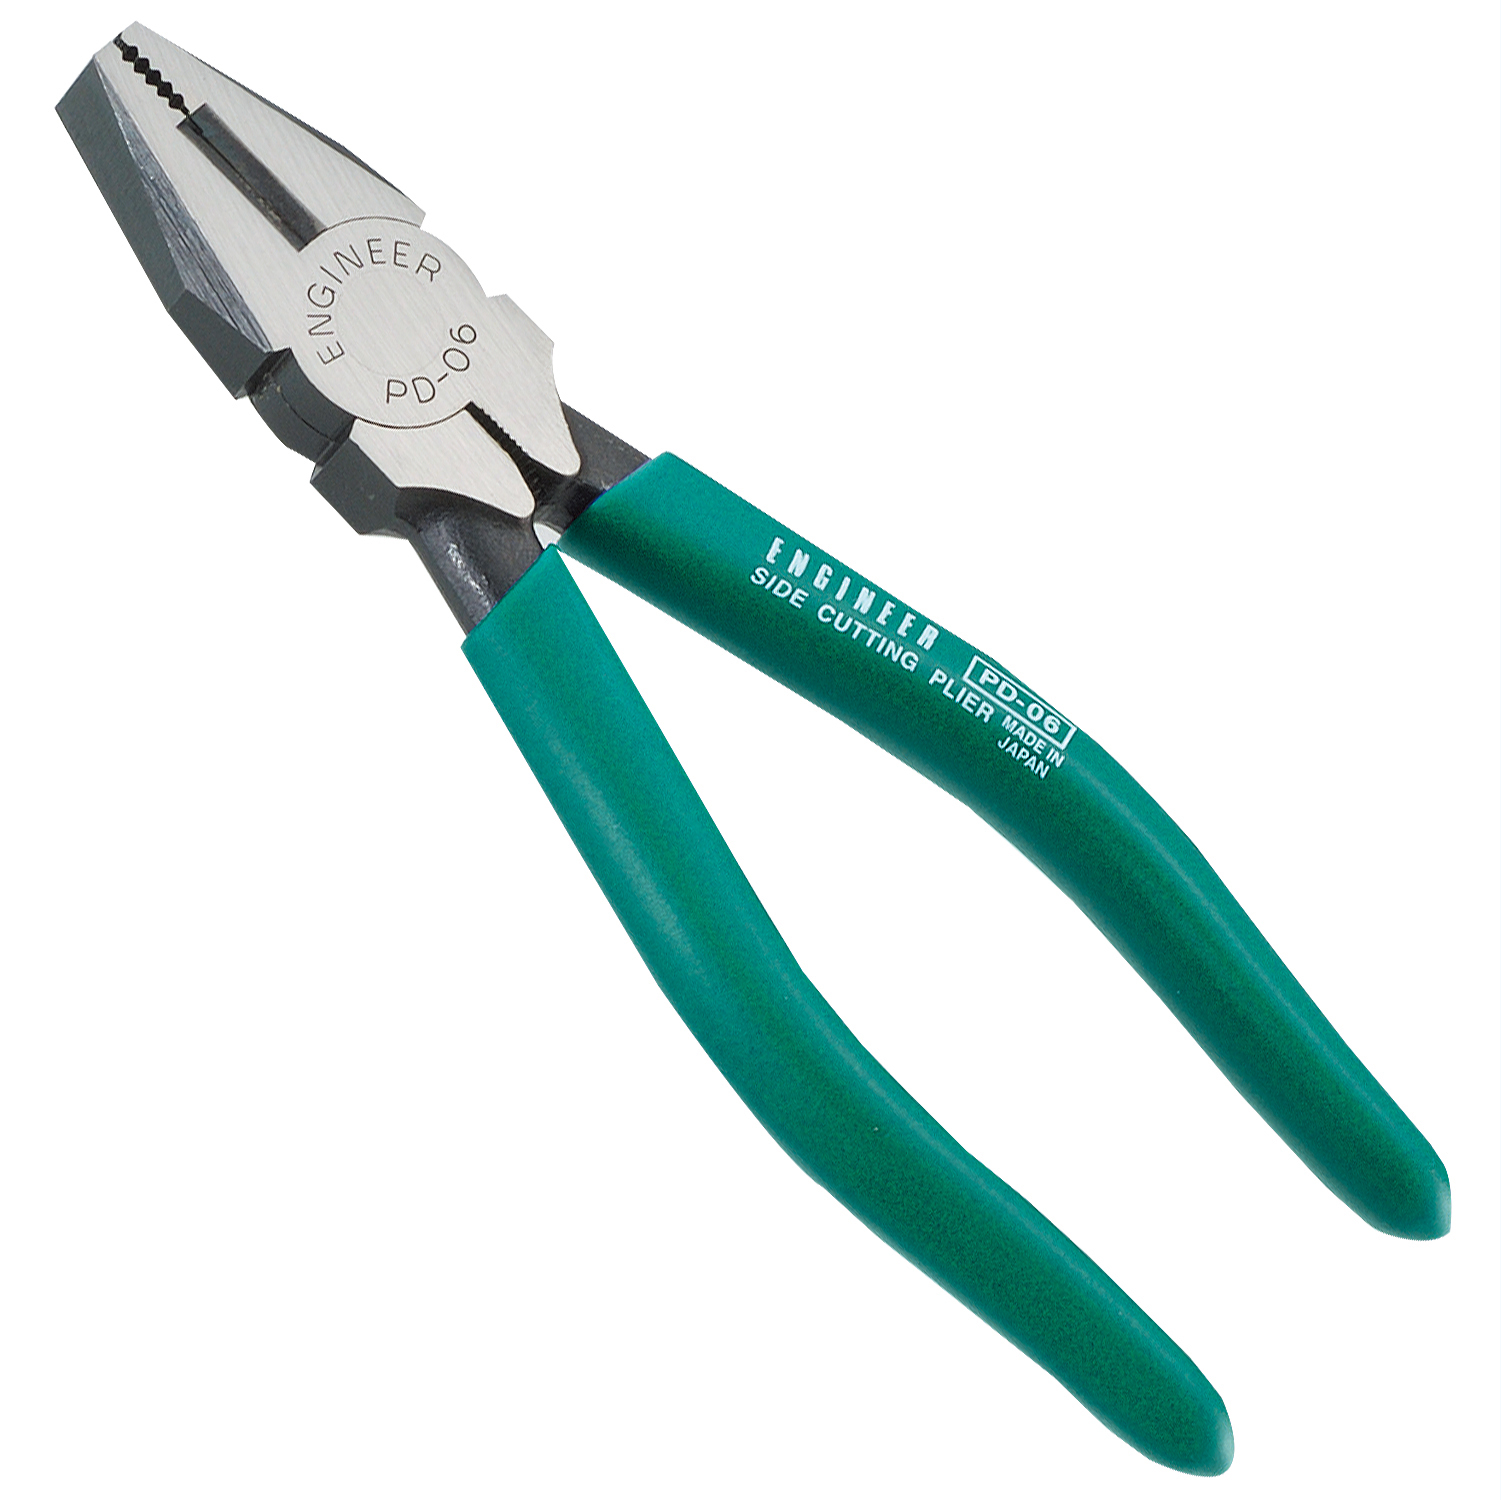 Electrician's Pliers PD-06 – 08 (ENGINEER)